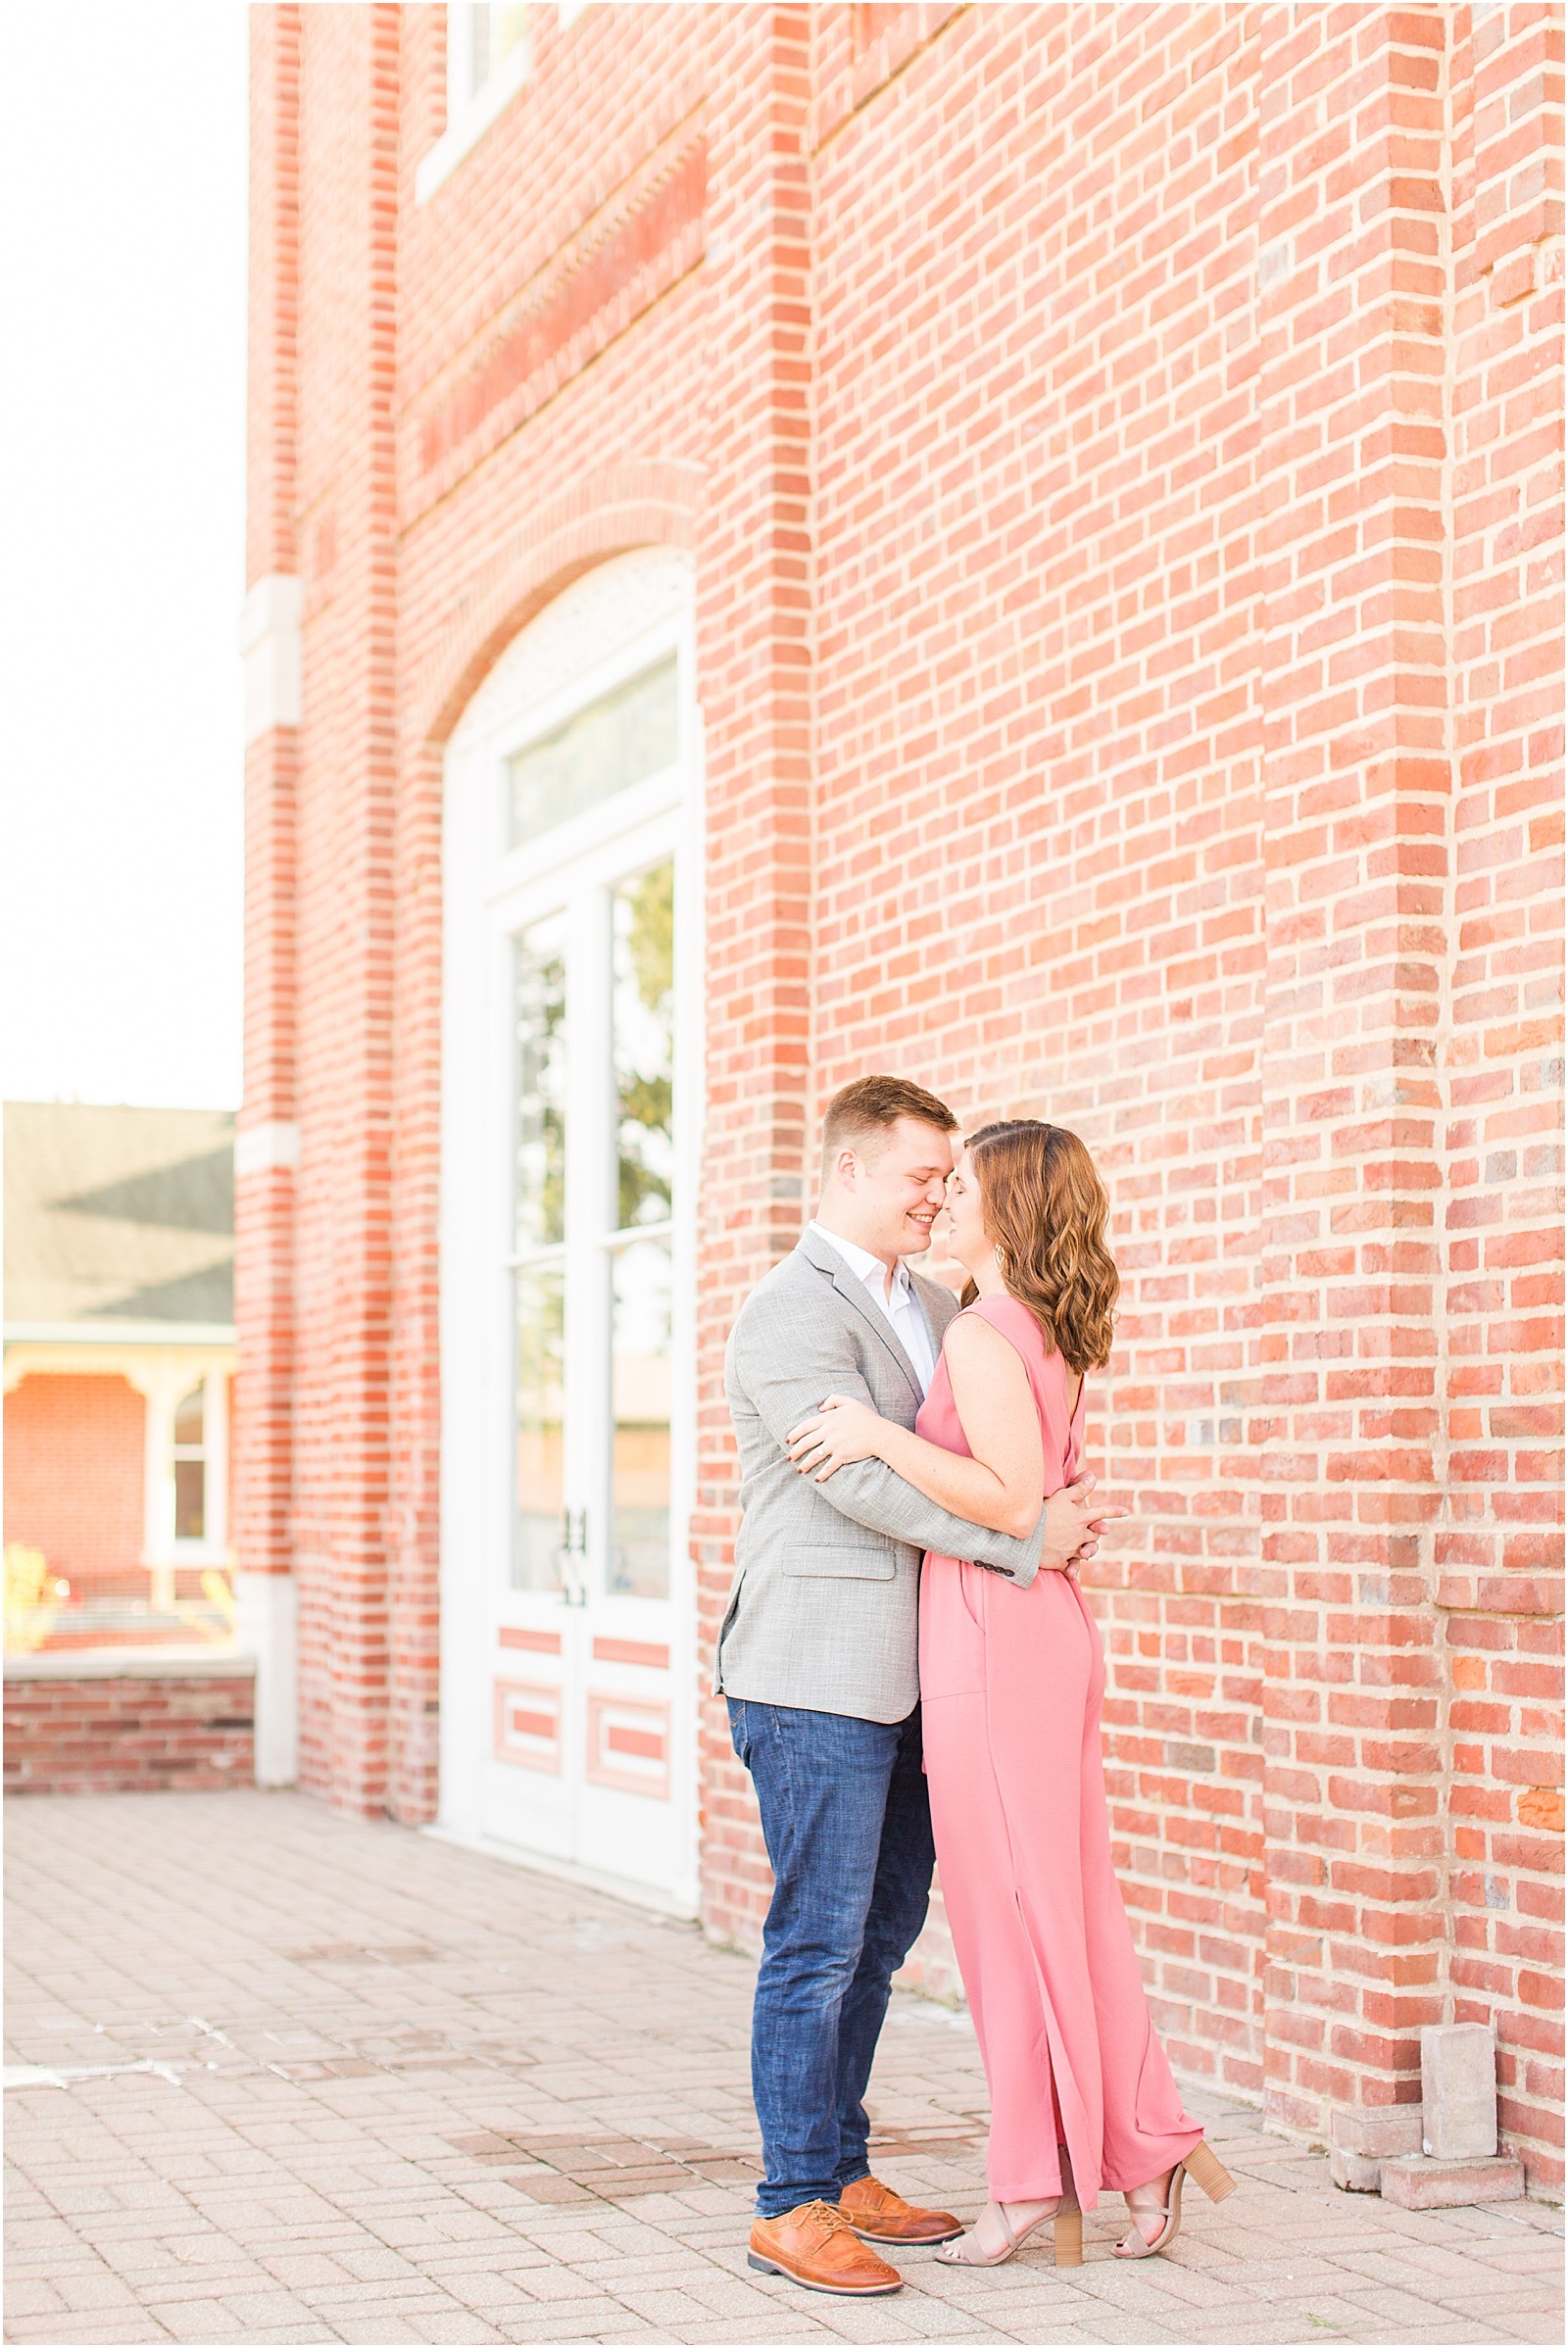 Downtown Huntingburgh Engagement Session | Gabby and Aidan | Bret and Brtandie Photography 002.jpg